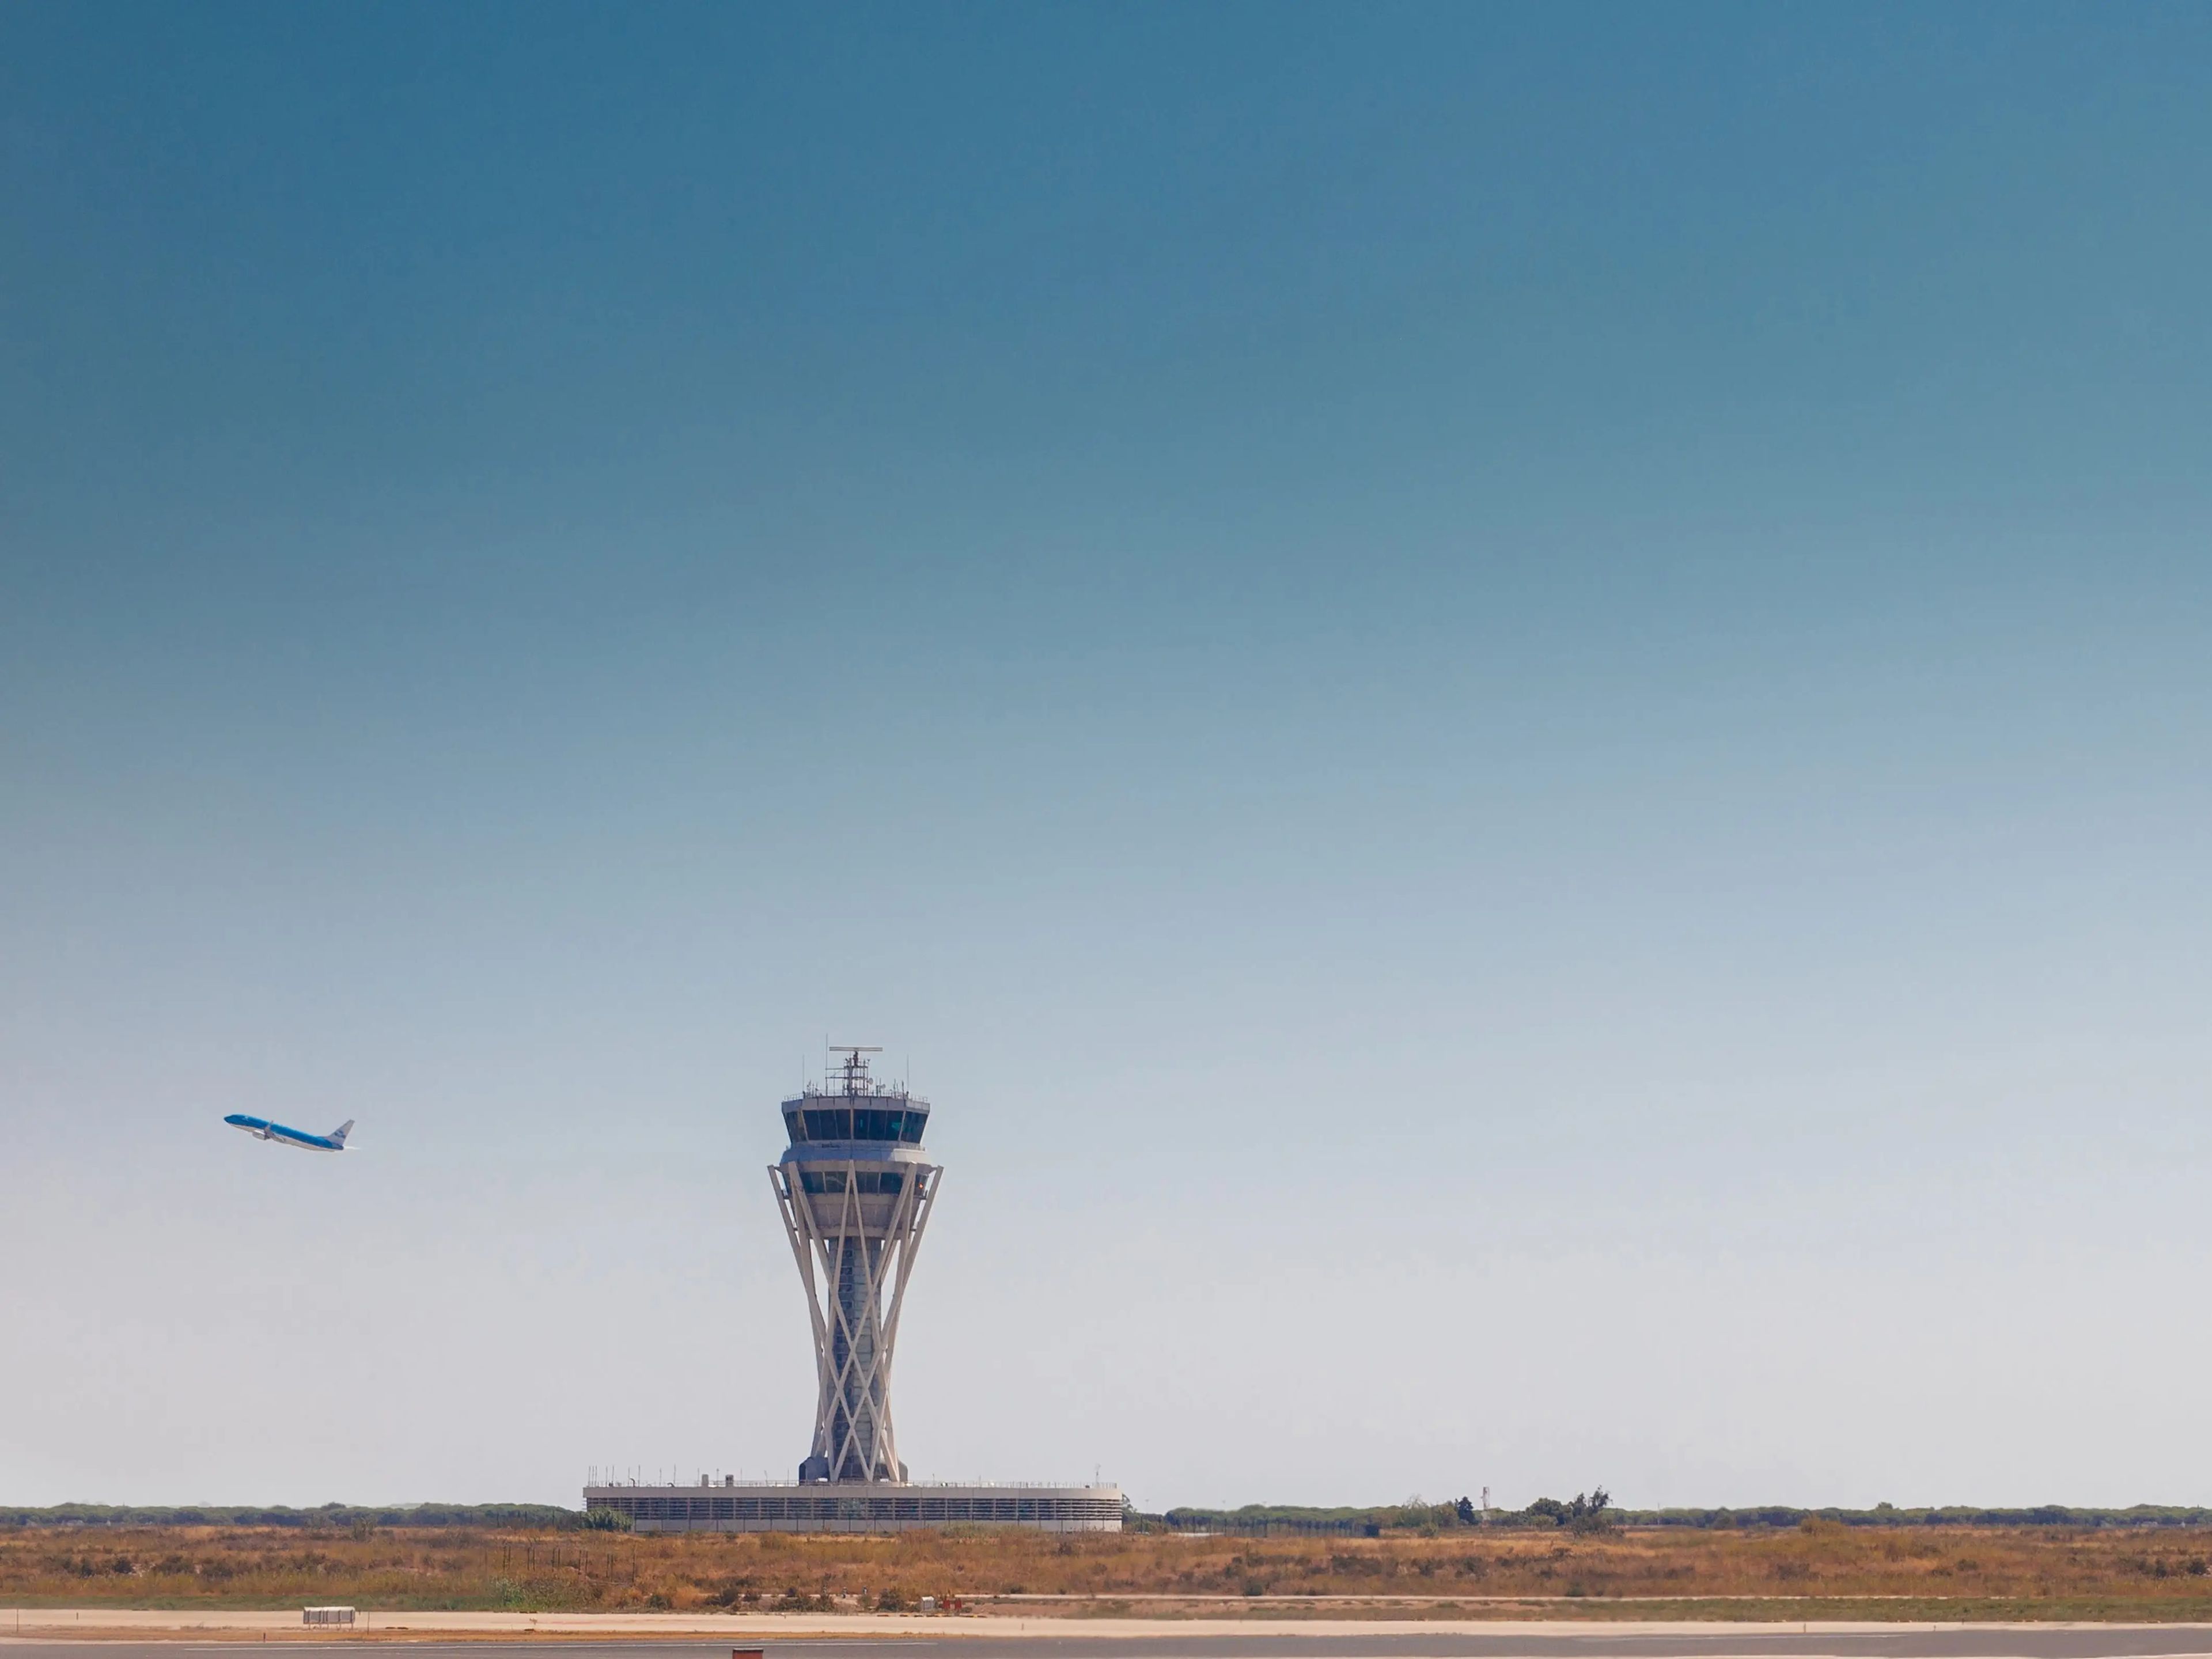 A plane takes off with an air traffic control tower in the foreground.